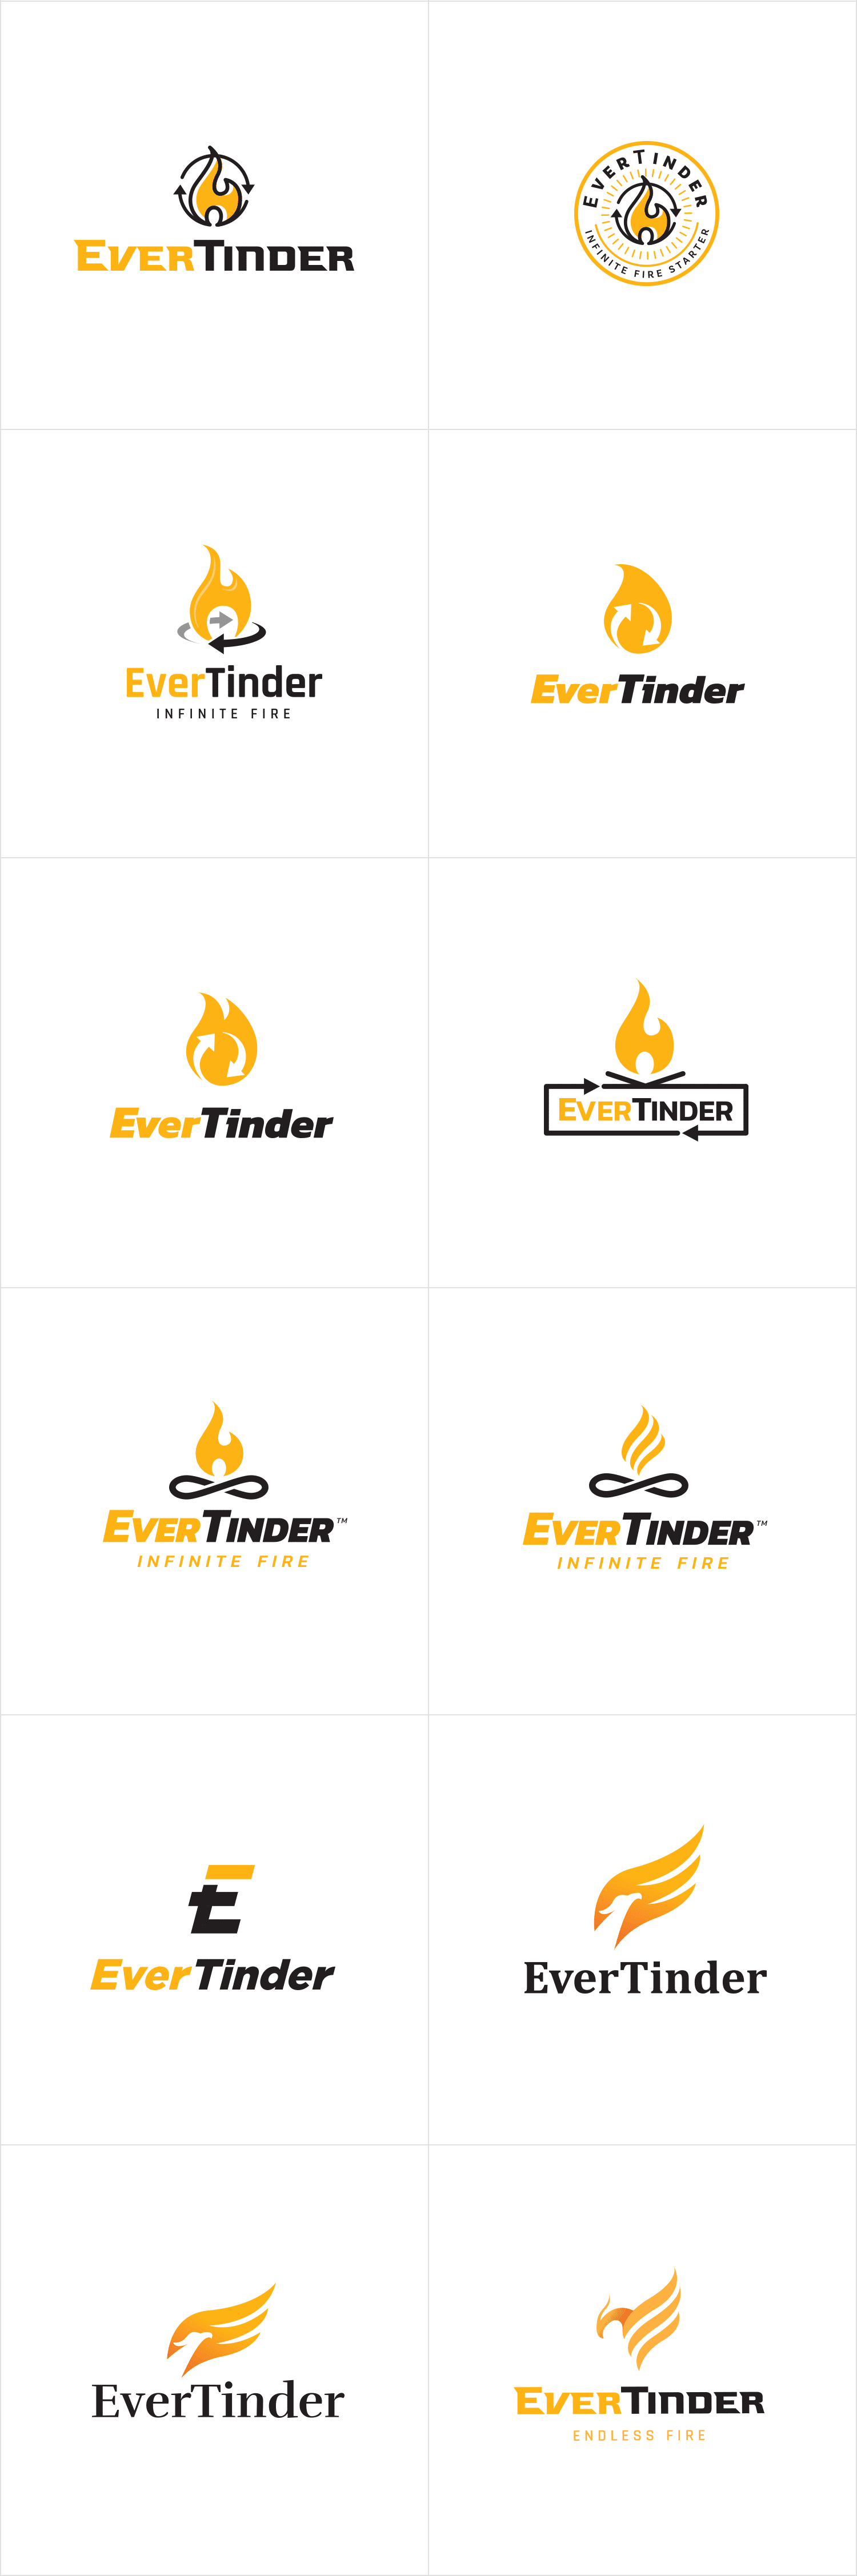 EverTinder initial logo concepts